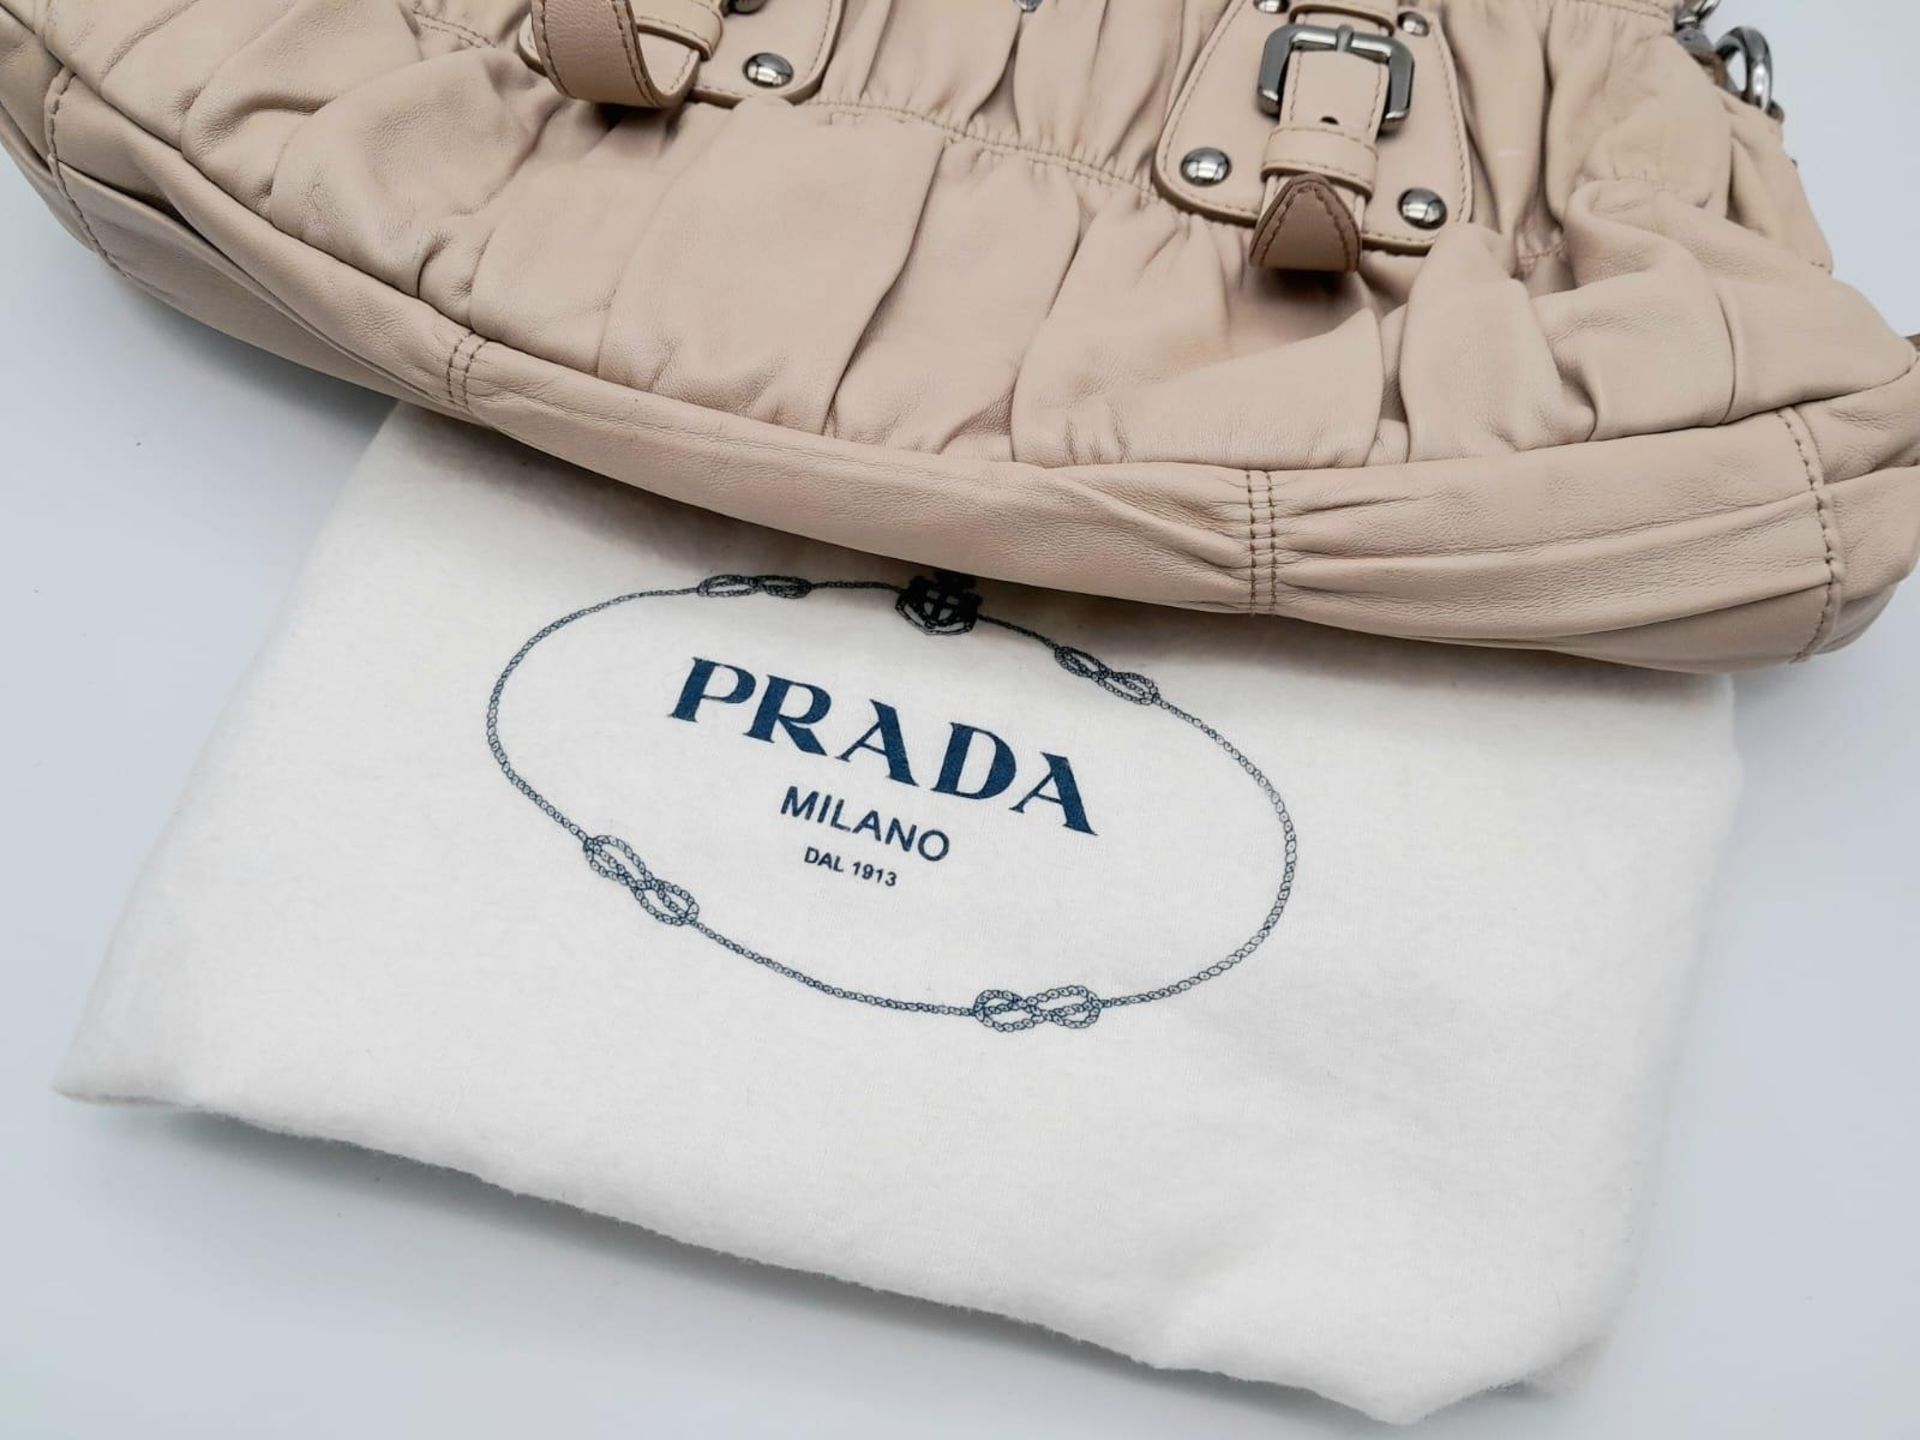 A PRADA BEIGE NAPPA LEATHER GAUFRE POMICE TOTE BAG. SILVER TONE HARD WEAR INCLUDING BUCKLE DETAIL. - Image 22 of 27